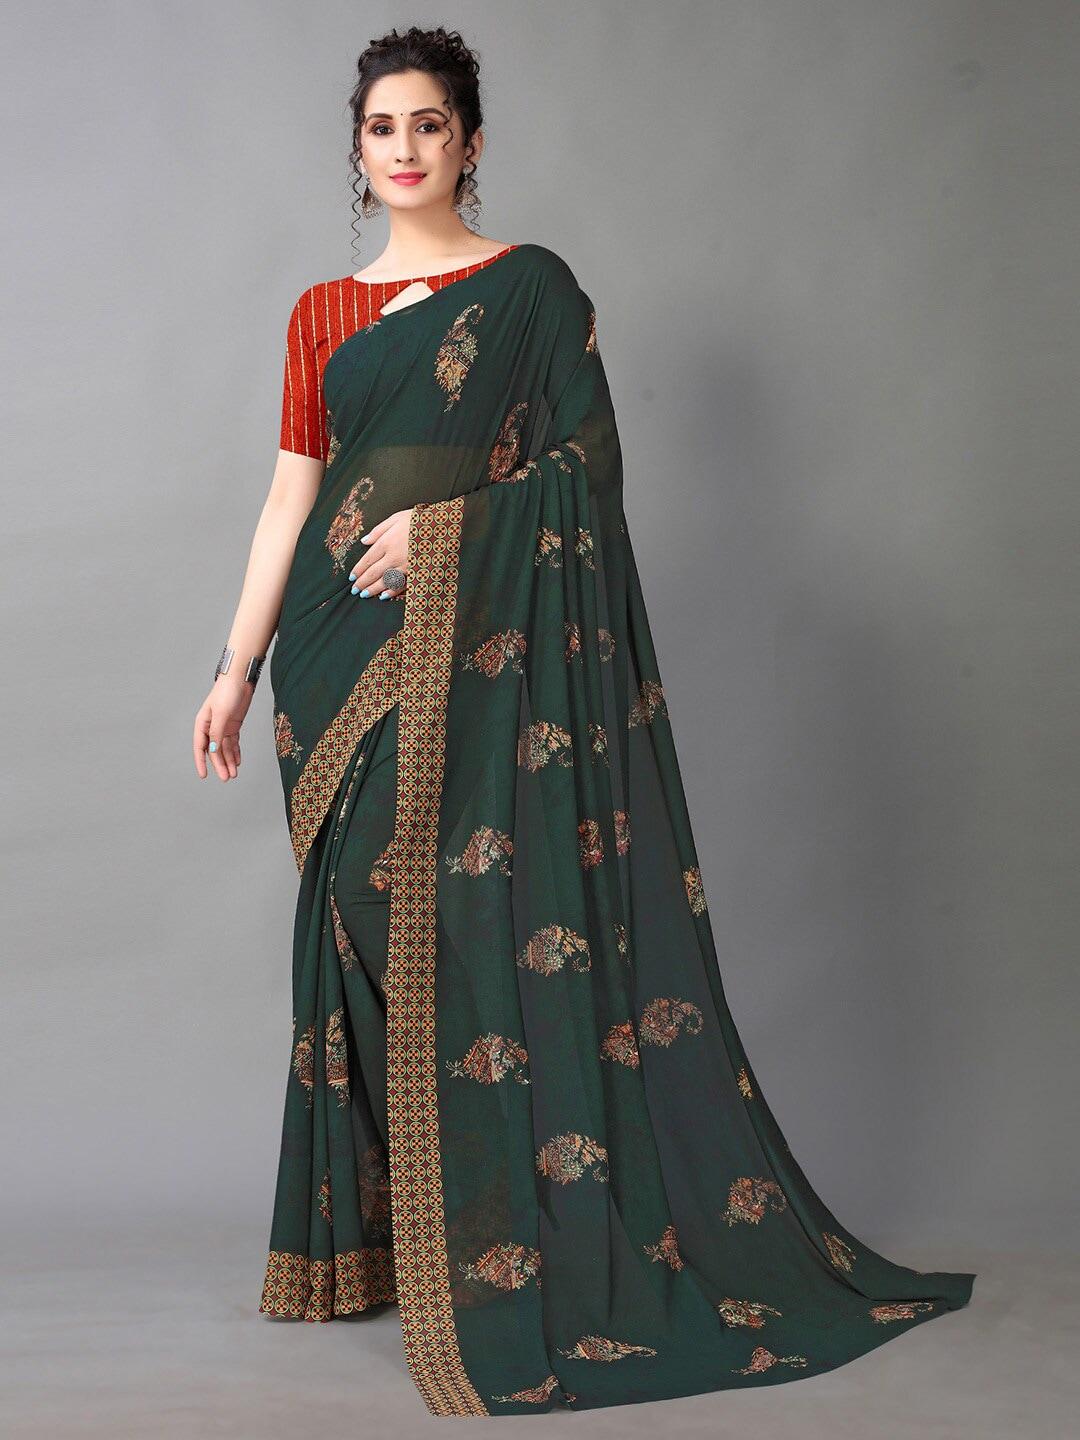 shaily-olive-green-&-red-ethnic-motifs-printed-pure-georgette-saree